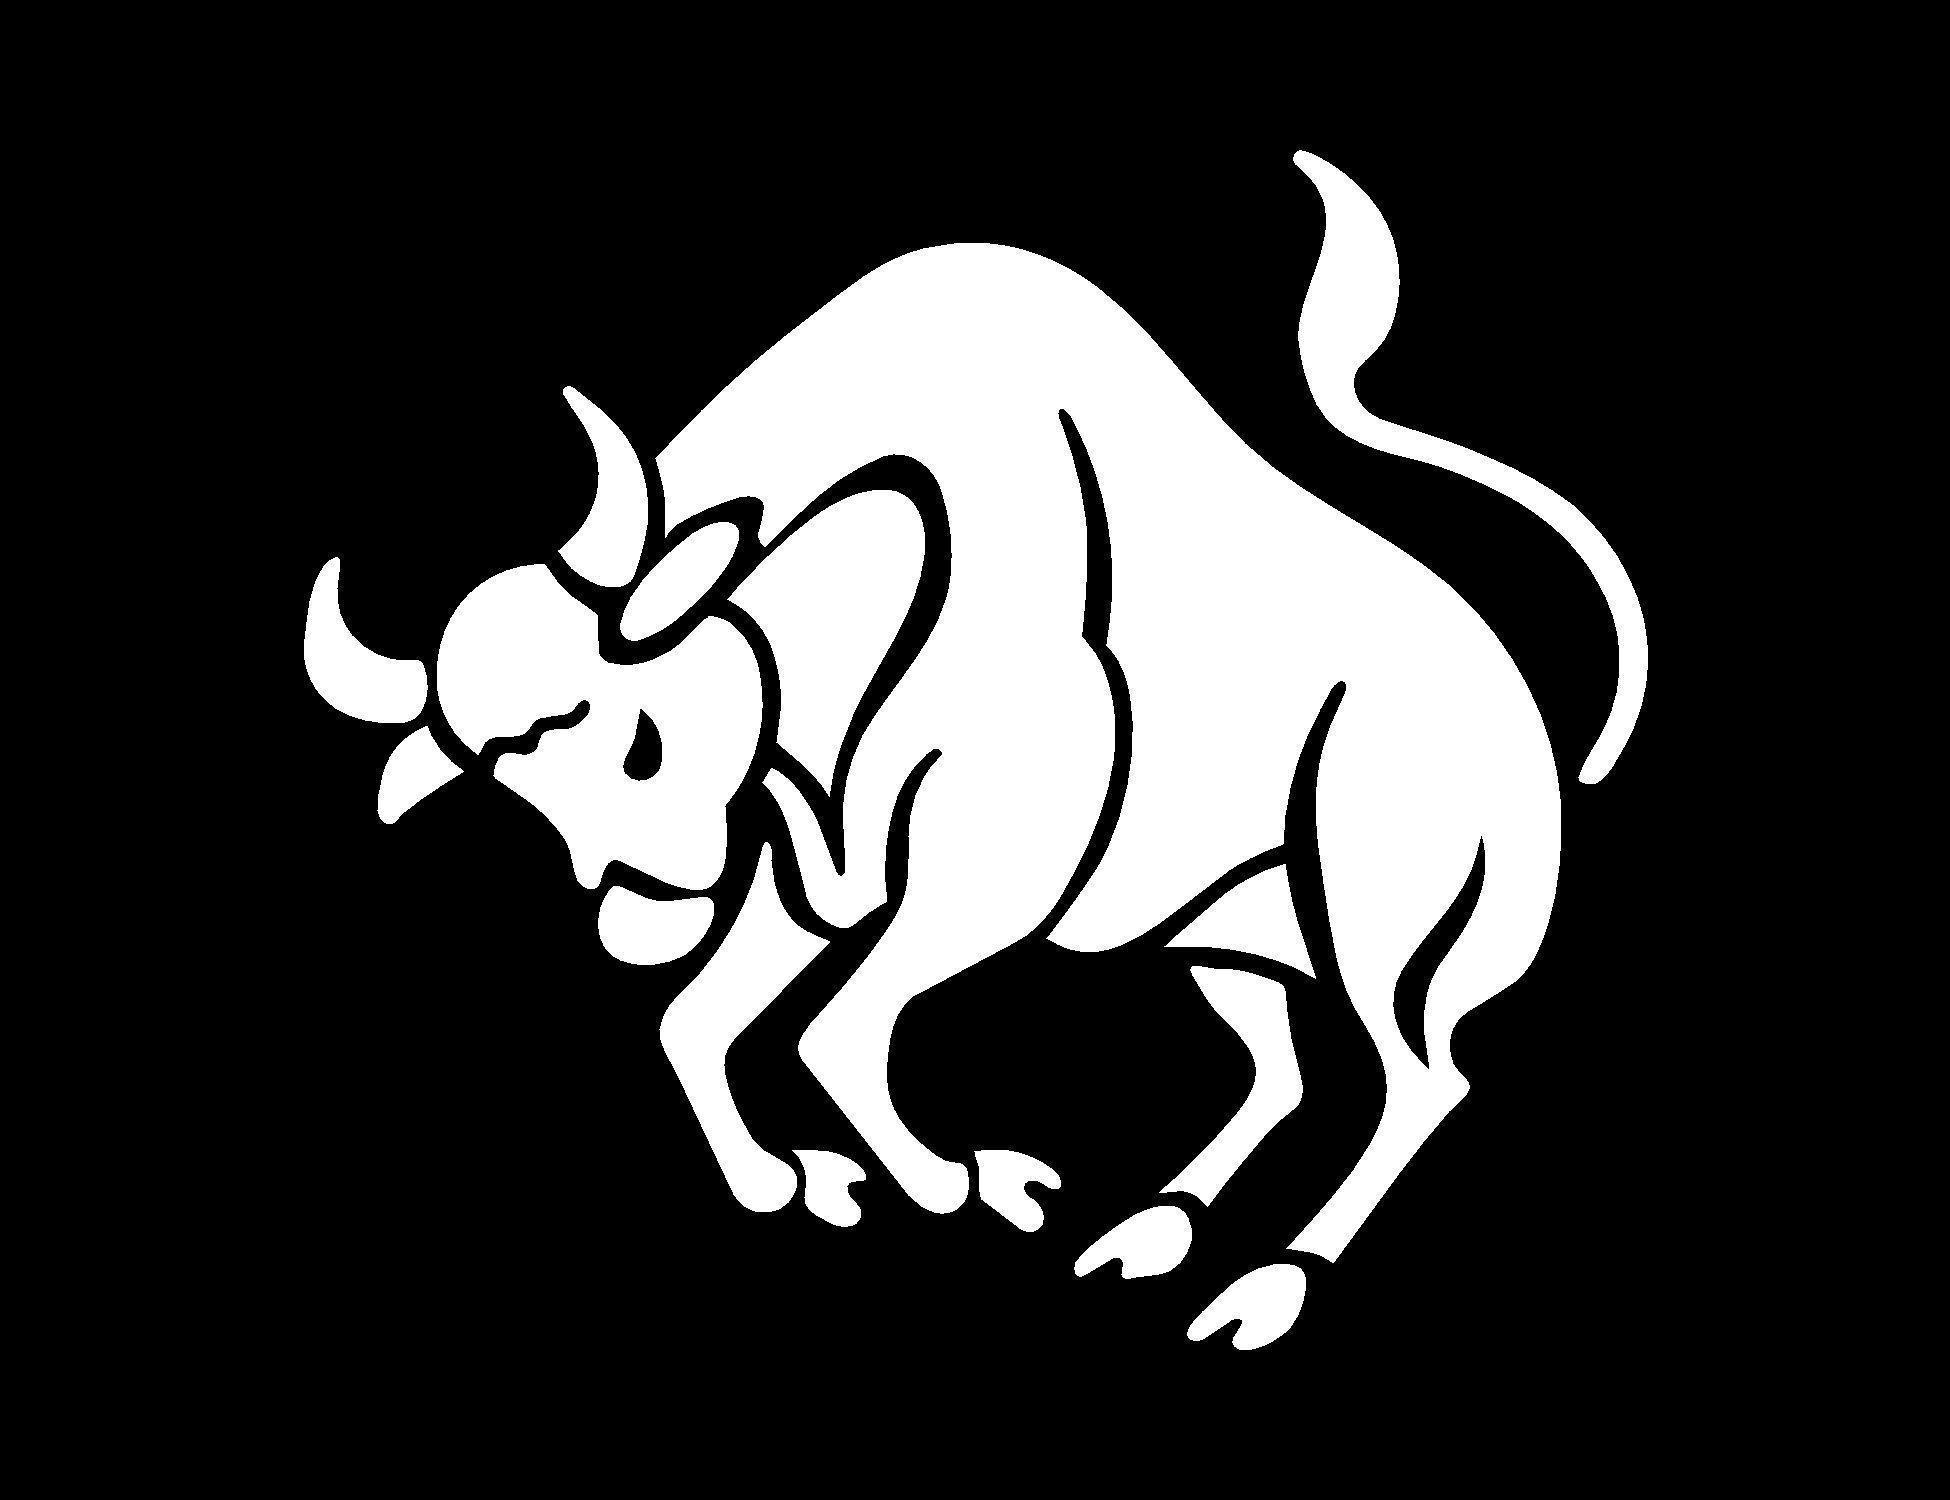 Taurus on a black background wallpaper and image